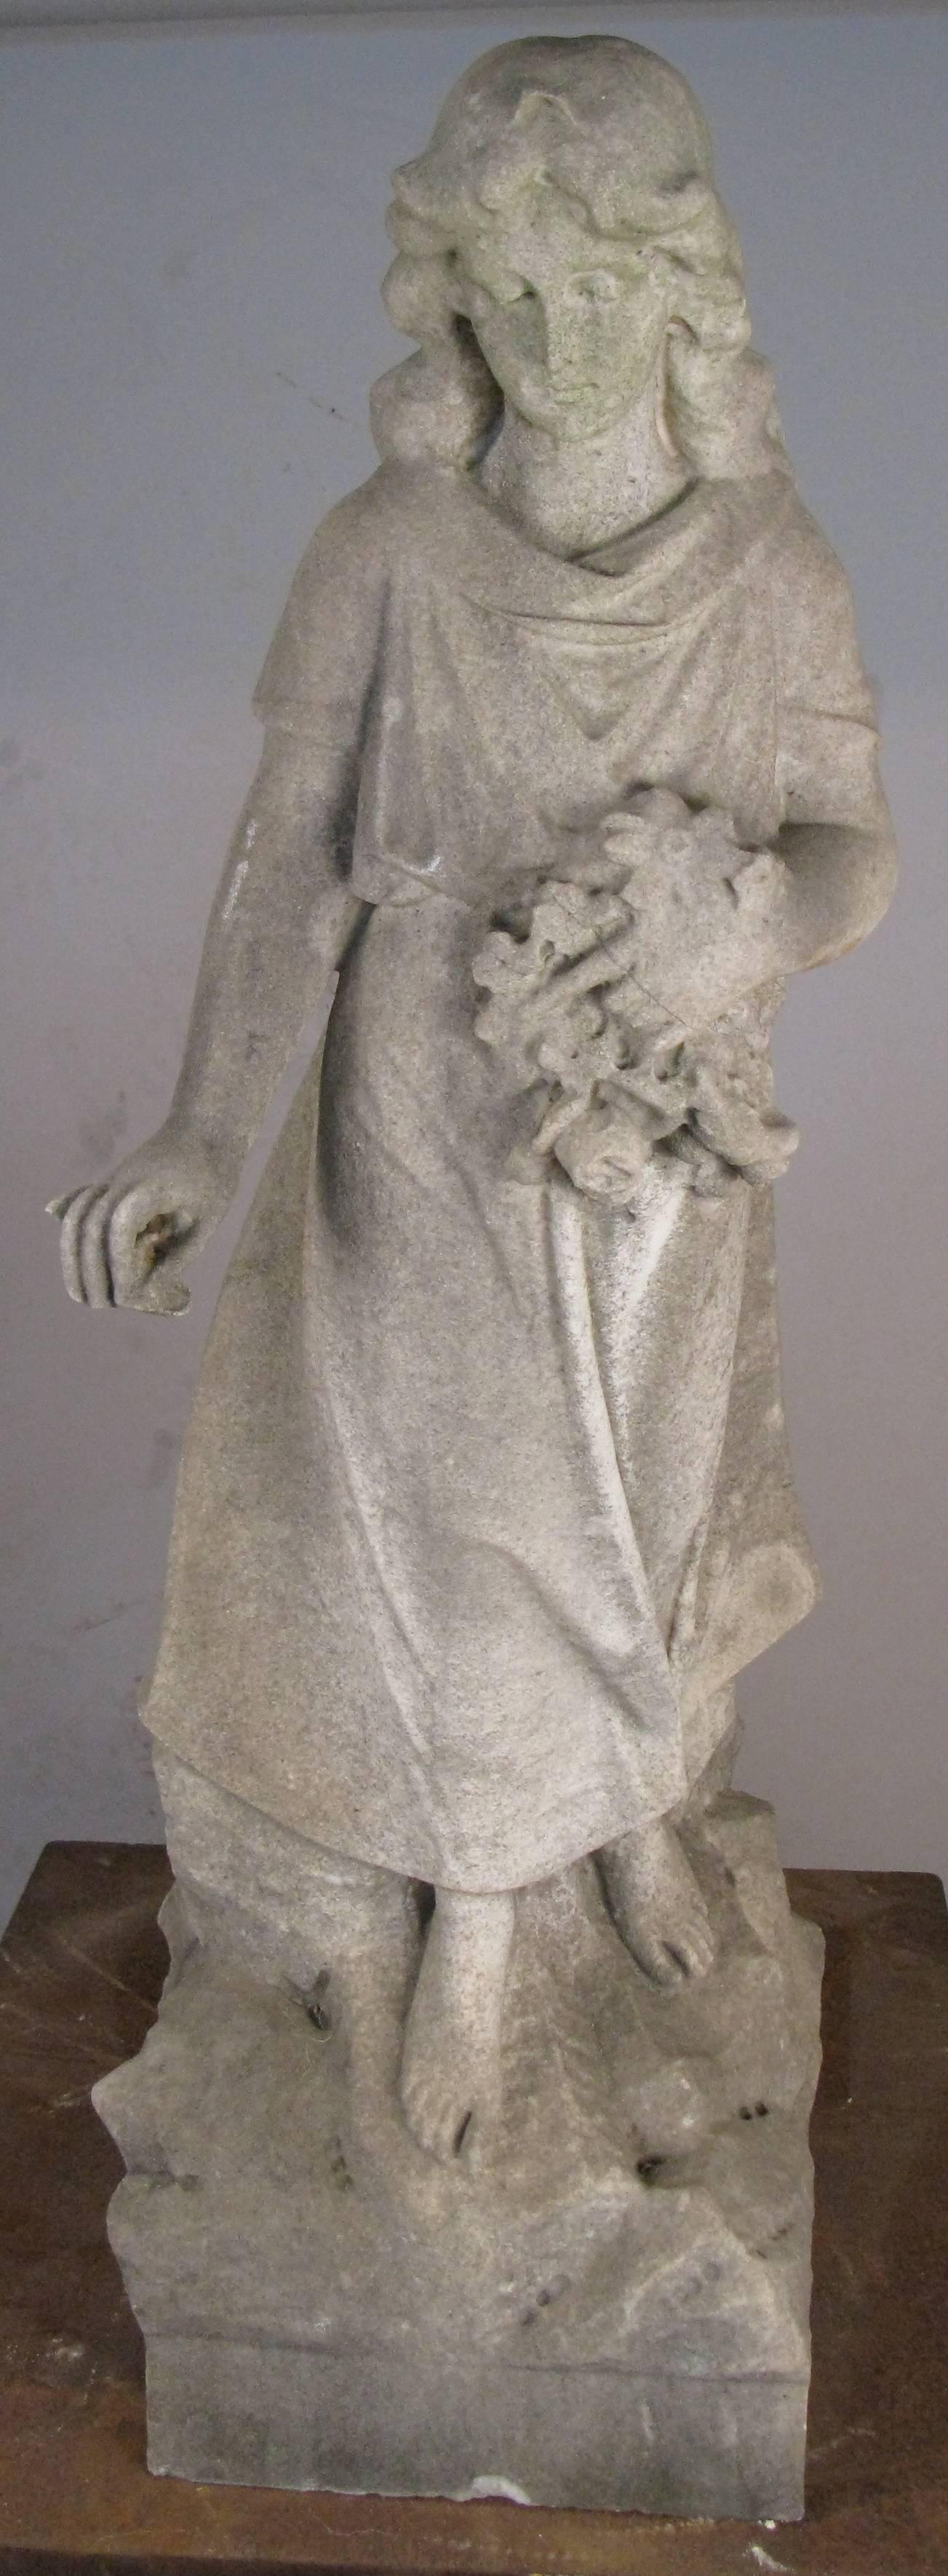 A very nicely done antique carged marble angel sculpture romantic period and style in good condition with nice patina looks like there may be a small loss to the tips of fingers on the right hand.